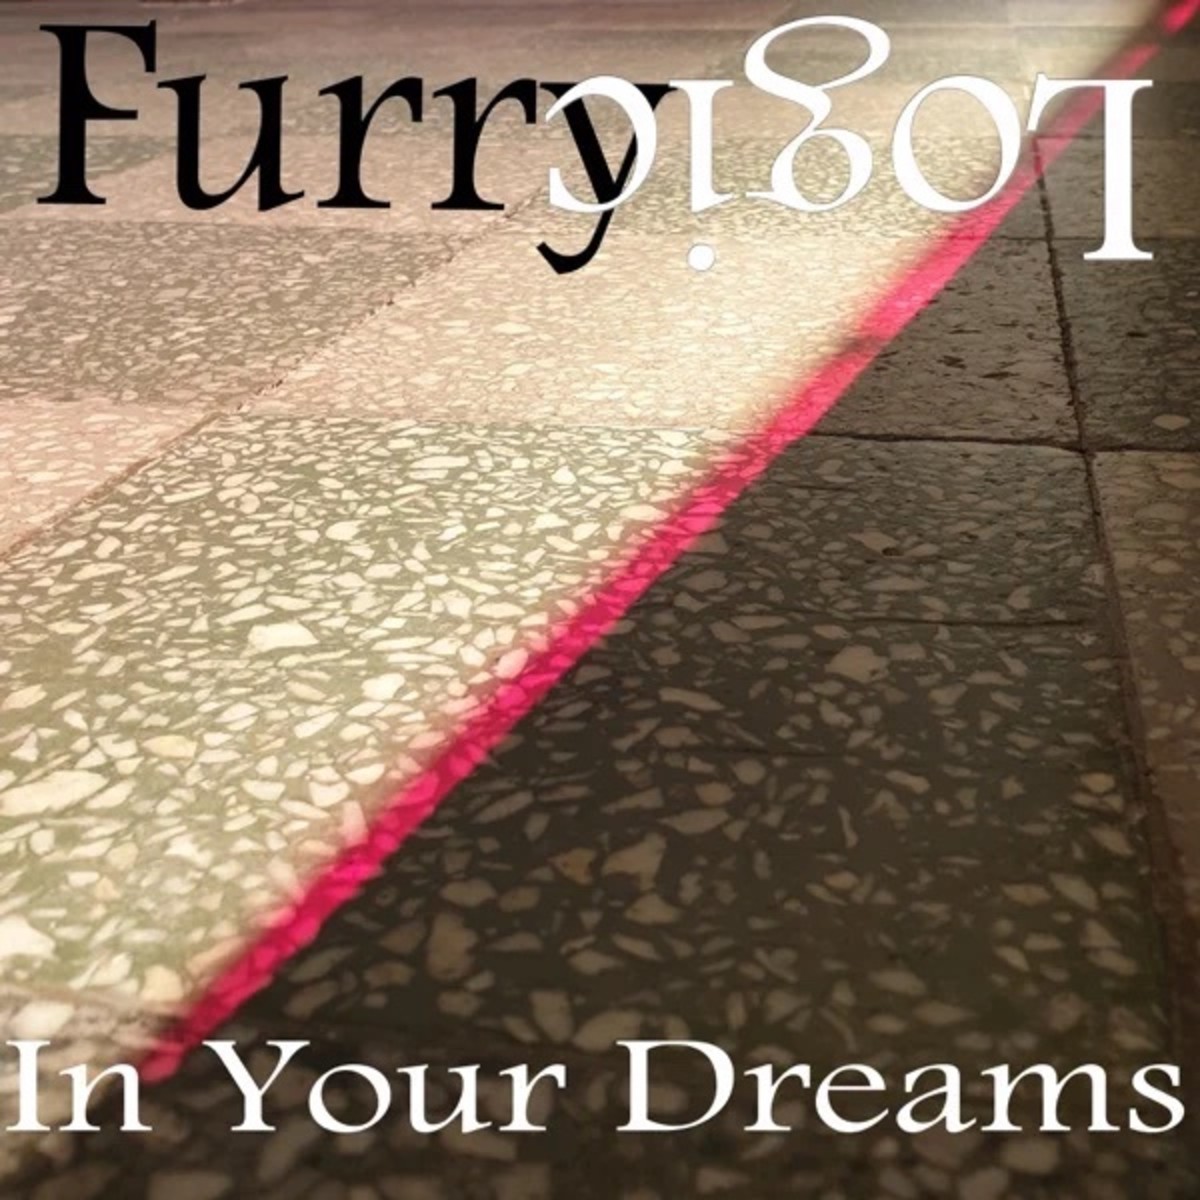 synth-single-review-in-your-dreams-by-furry-logic